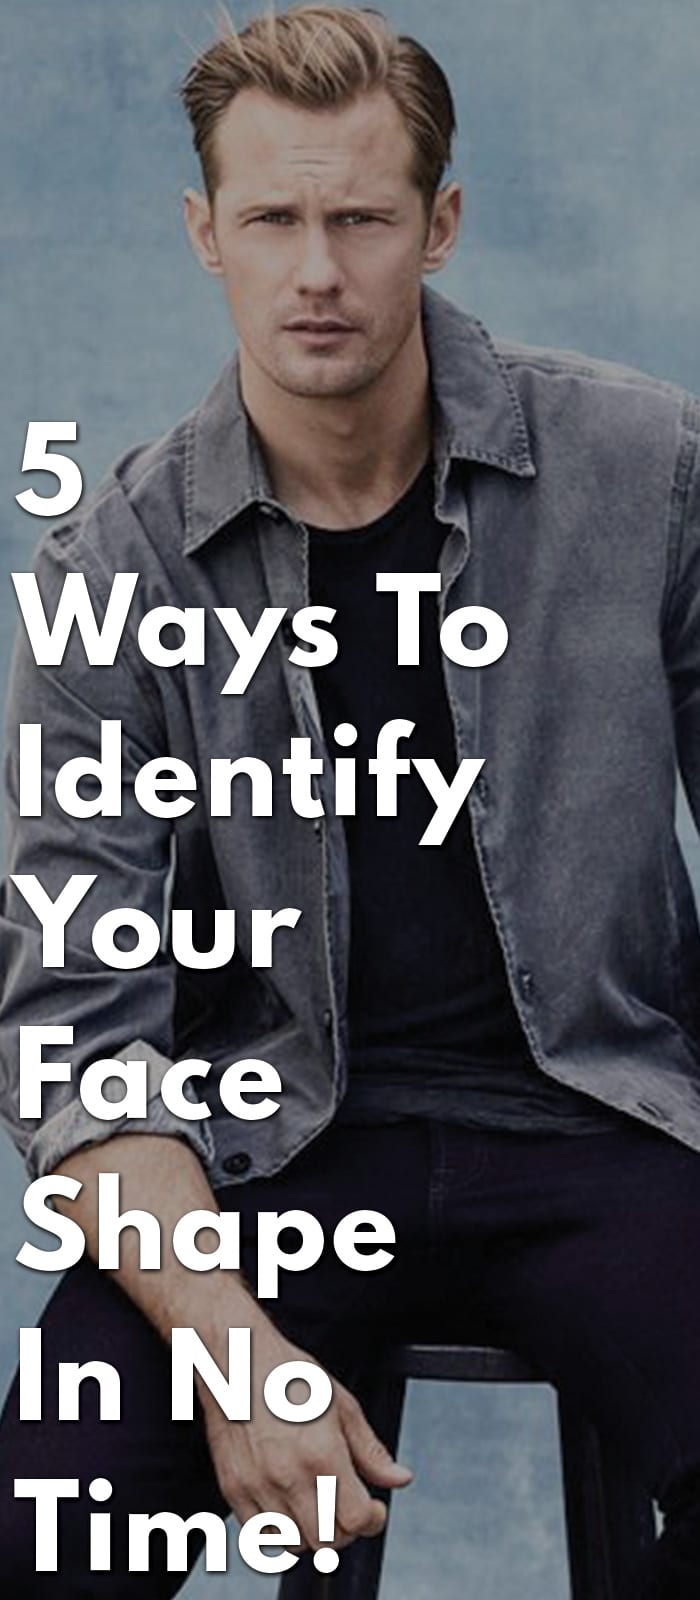 5-Ways-To-Identify-Your-Face-Shape-In-No-Time!